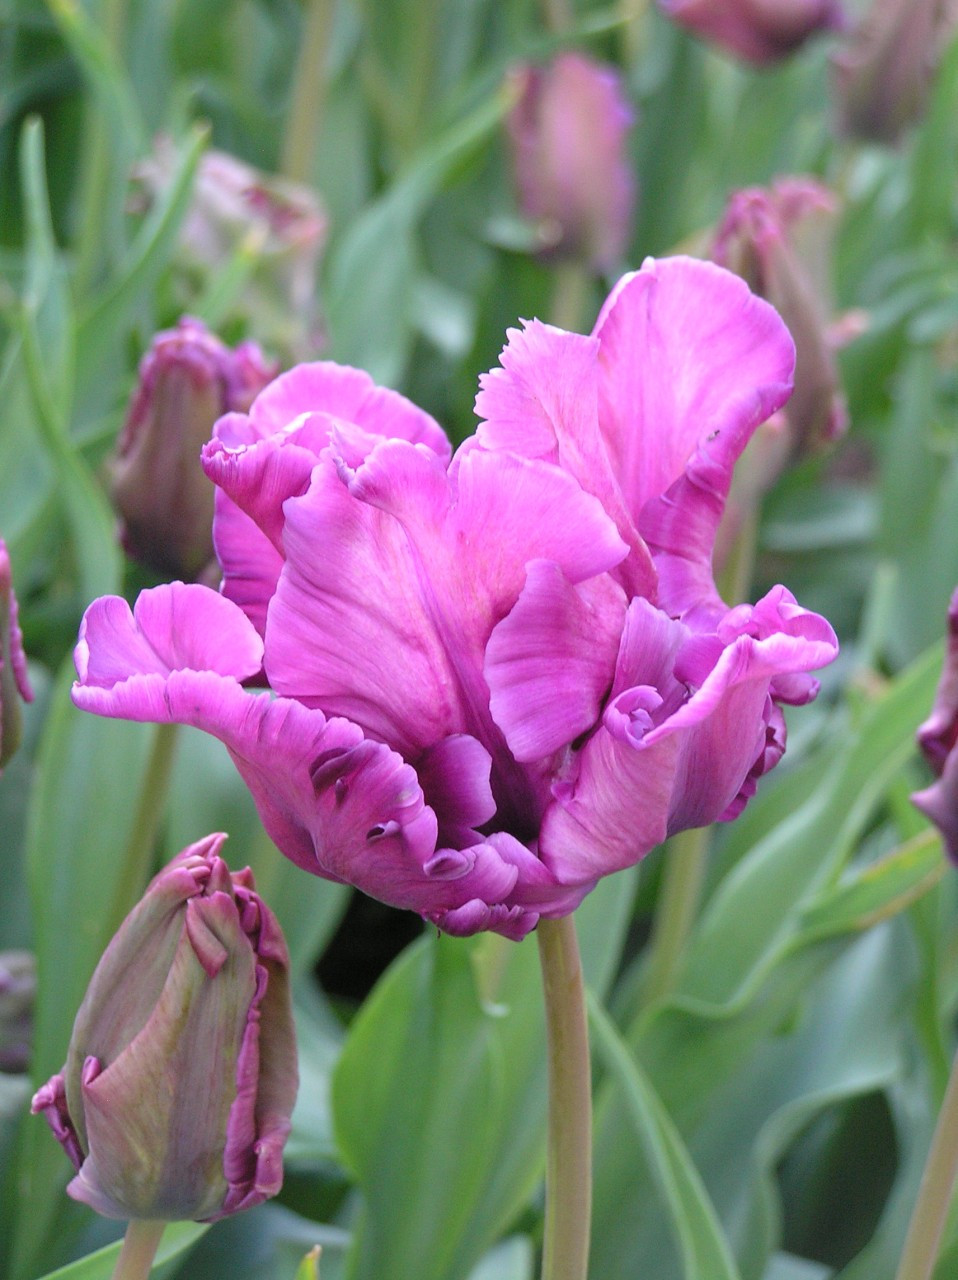 Blue Parrot Parrot Tulips Tulips With A Difference